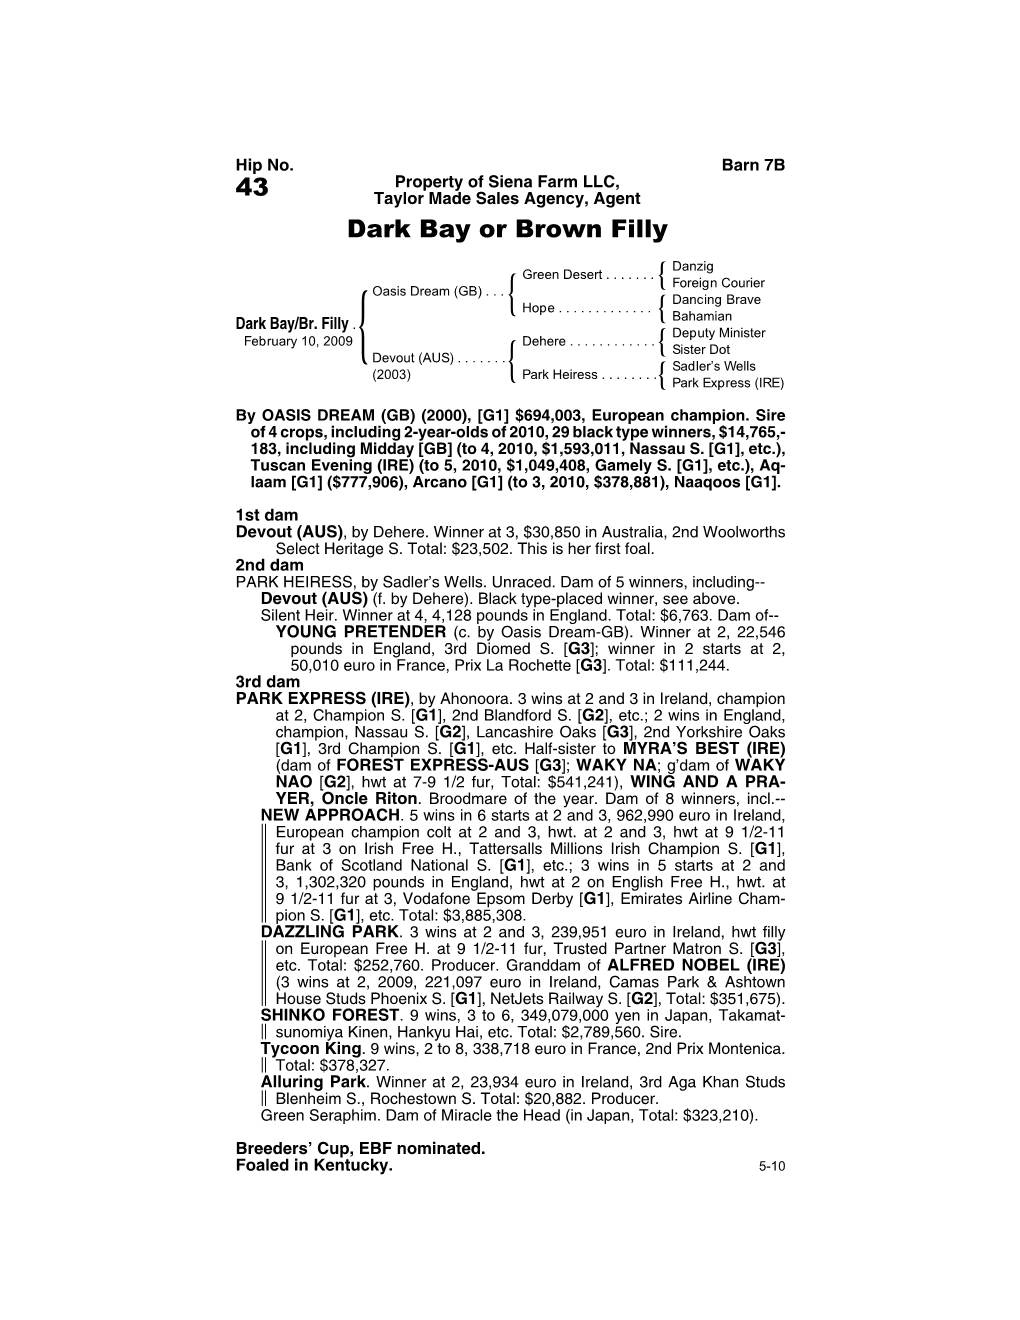 43 Taylor Made Sales Agency, Agent Dark Bay Or Brown Filly